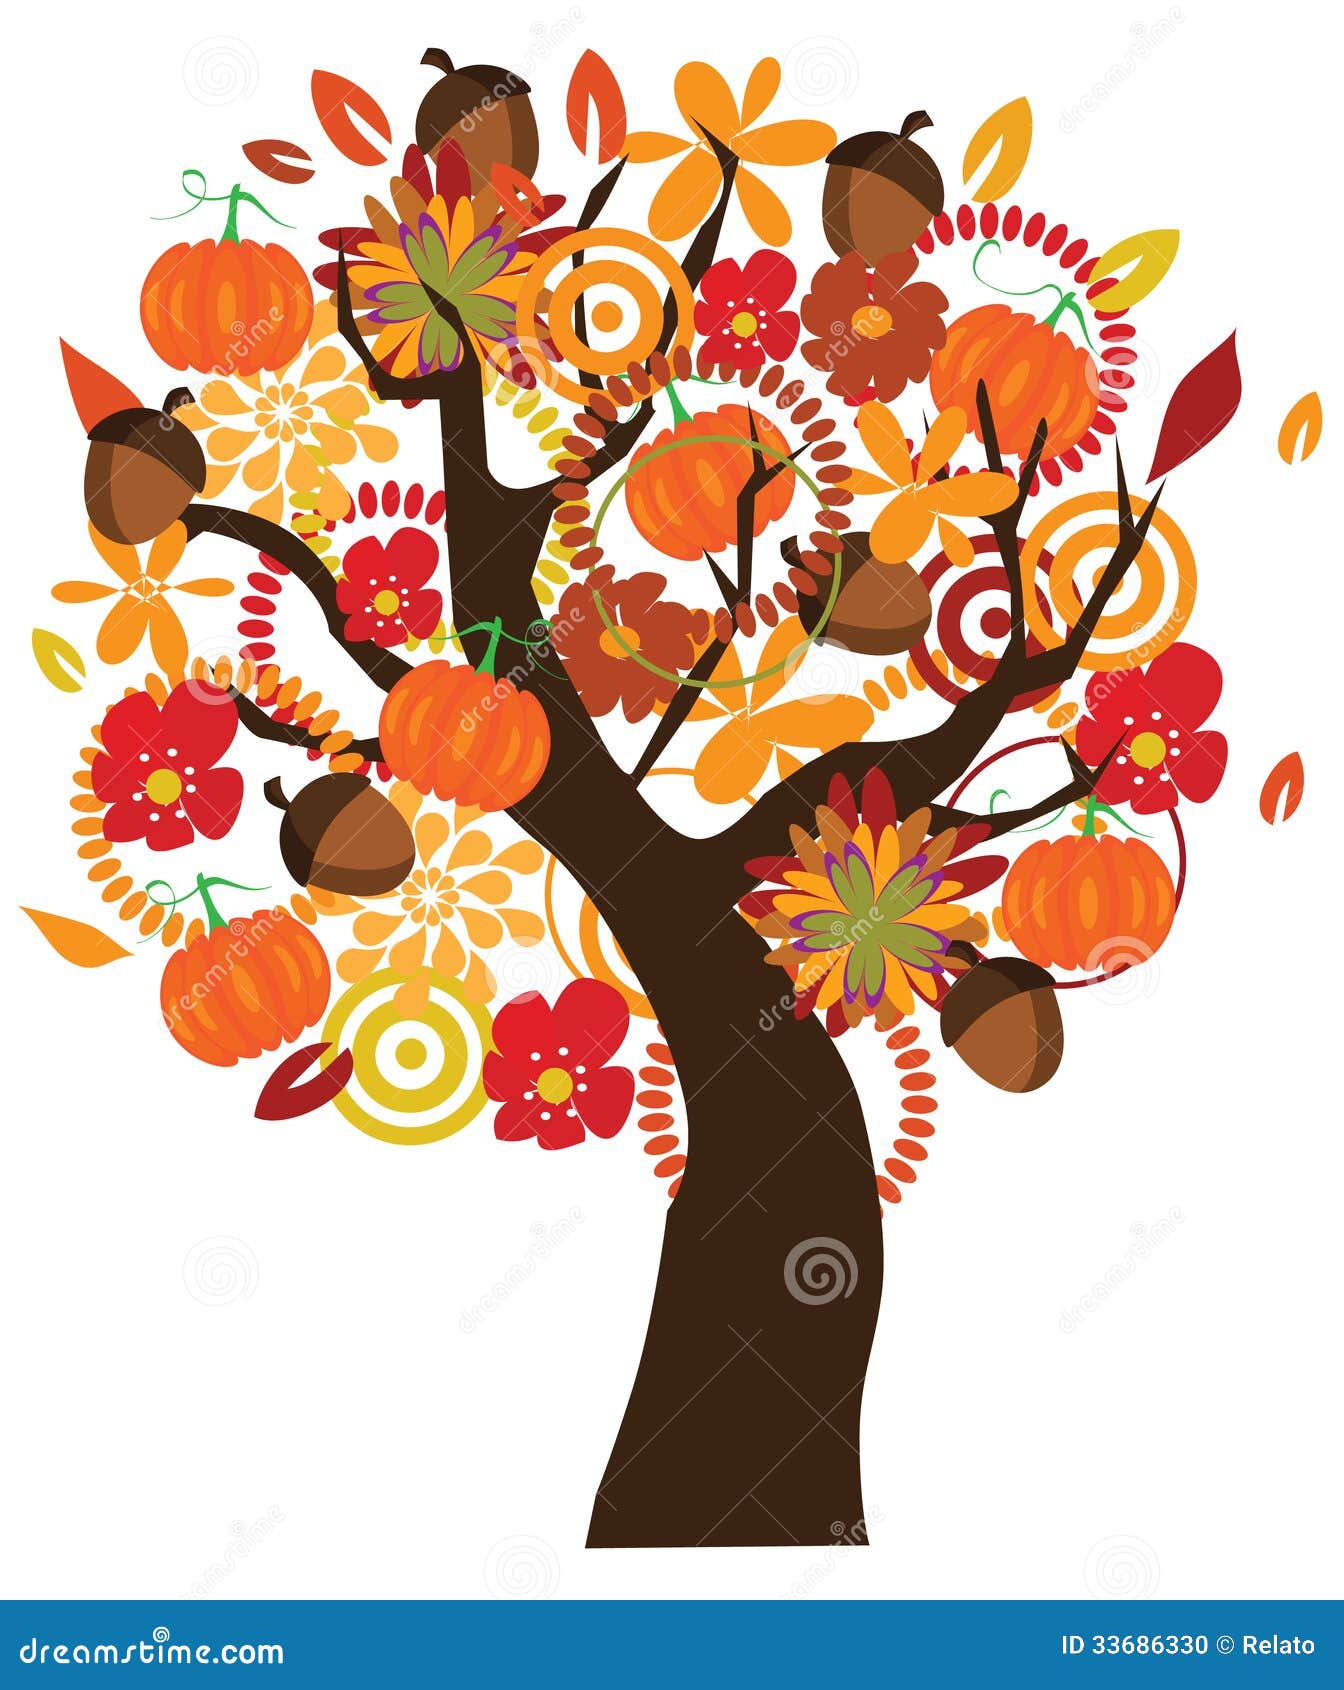 Illustration of a tree in fall with elements.